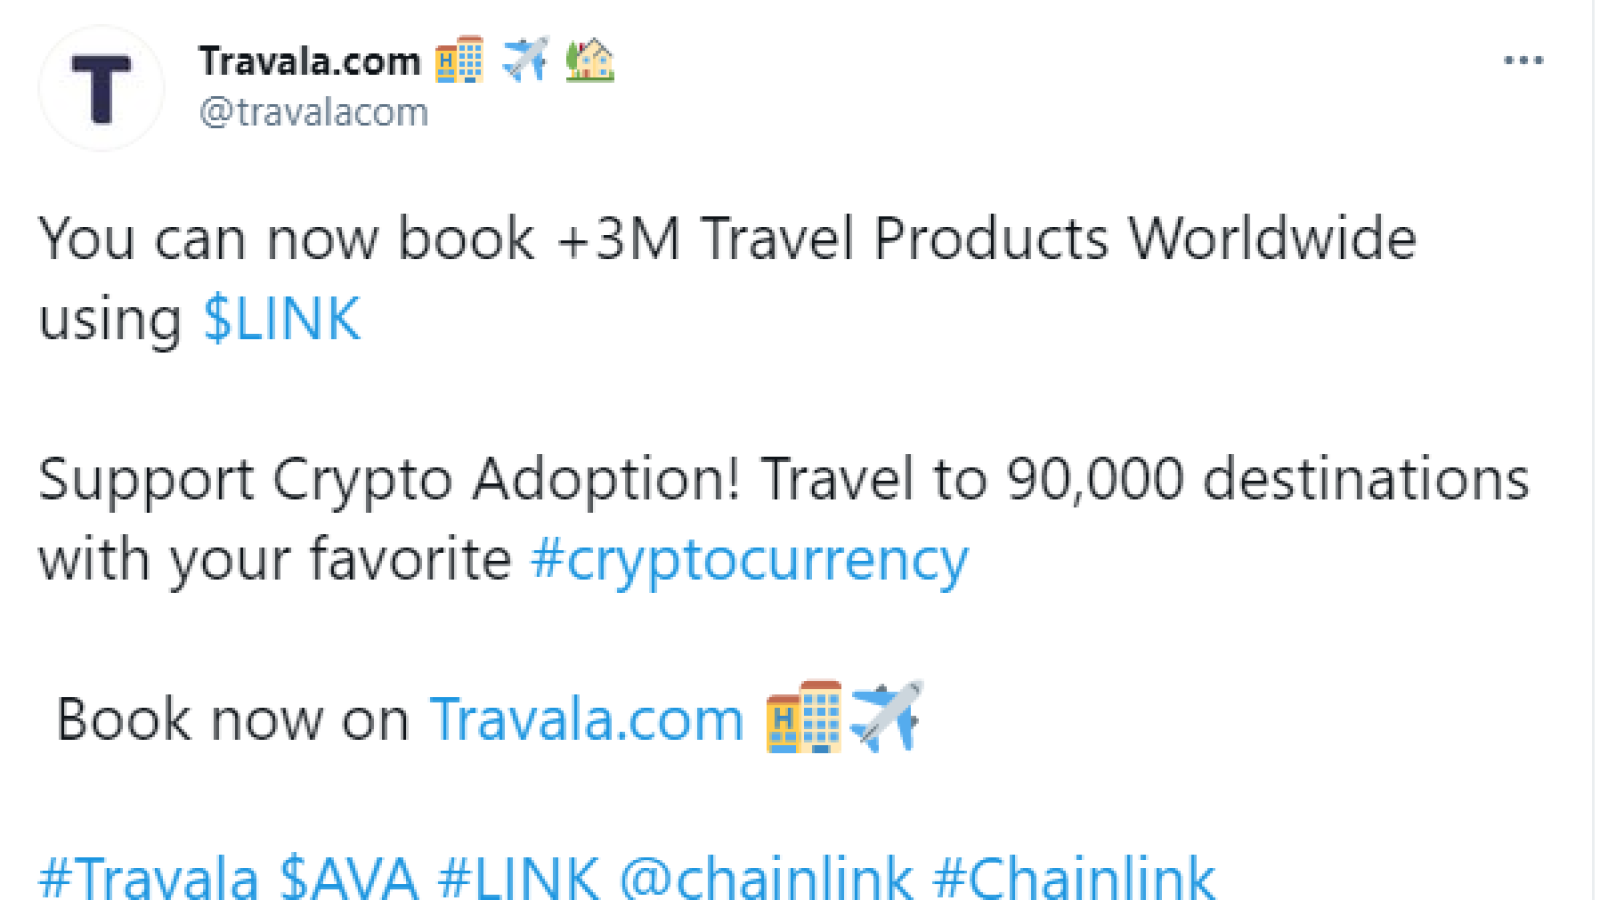 Travala partners Chainlink to accept LINK payments